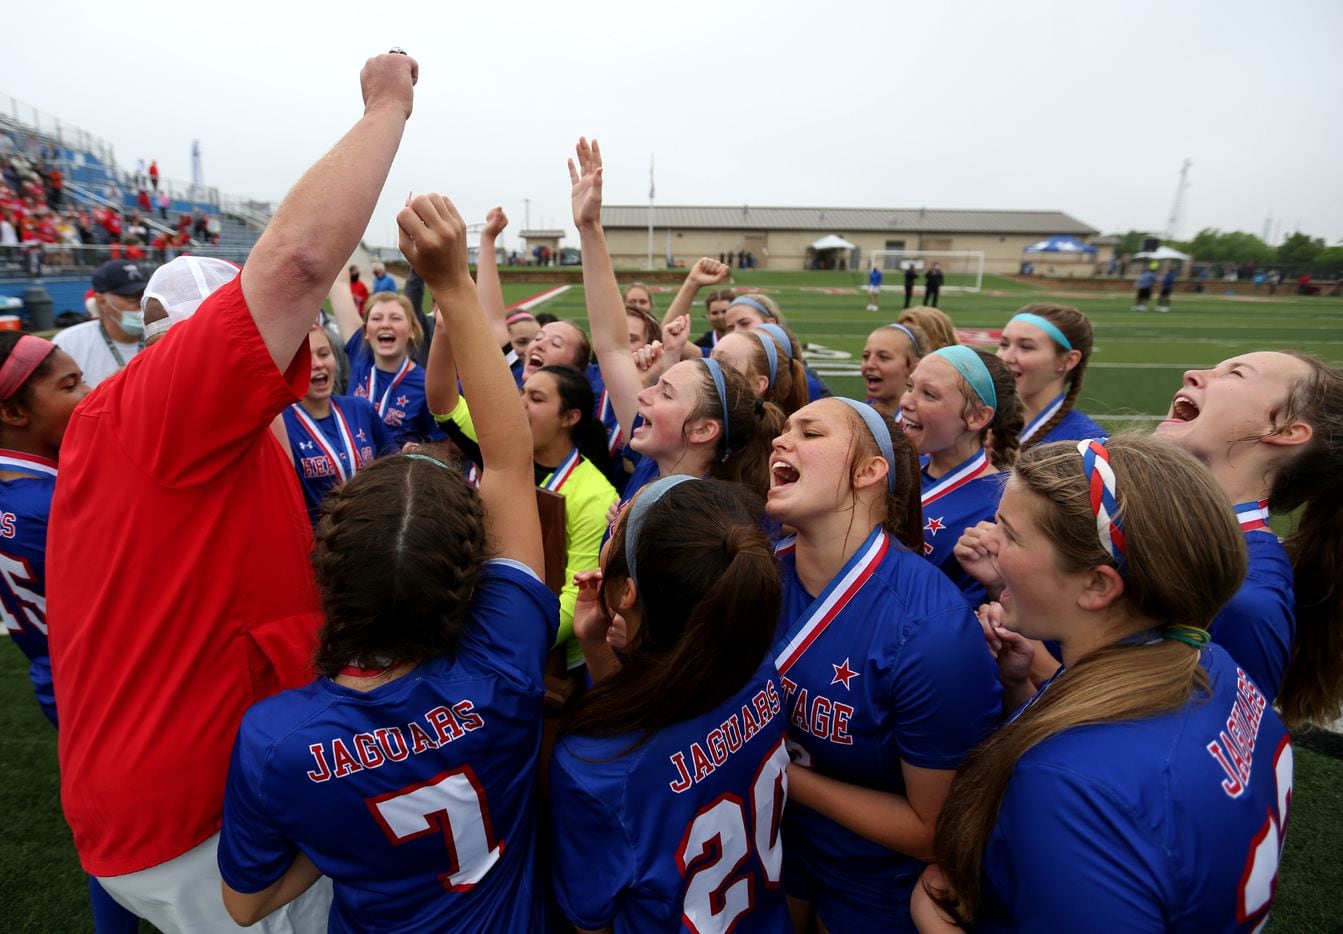 Midlothian Heritage head coach Gerald Slovacek cheers with his players at their win over Calallen at their UIL 4A girls State championship soccer game at Birkelbach Field on April 16, 2021 in Georgetown, Texas.  (Thao Nguyen/Special Contributor)